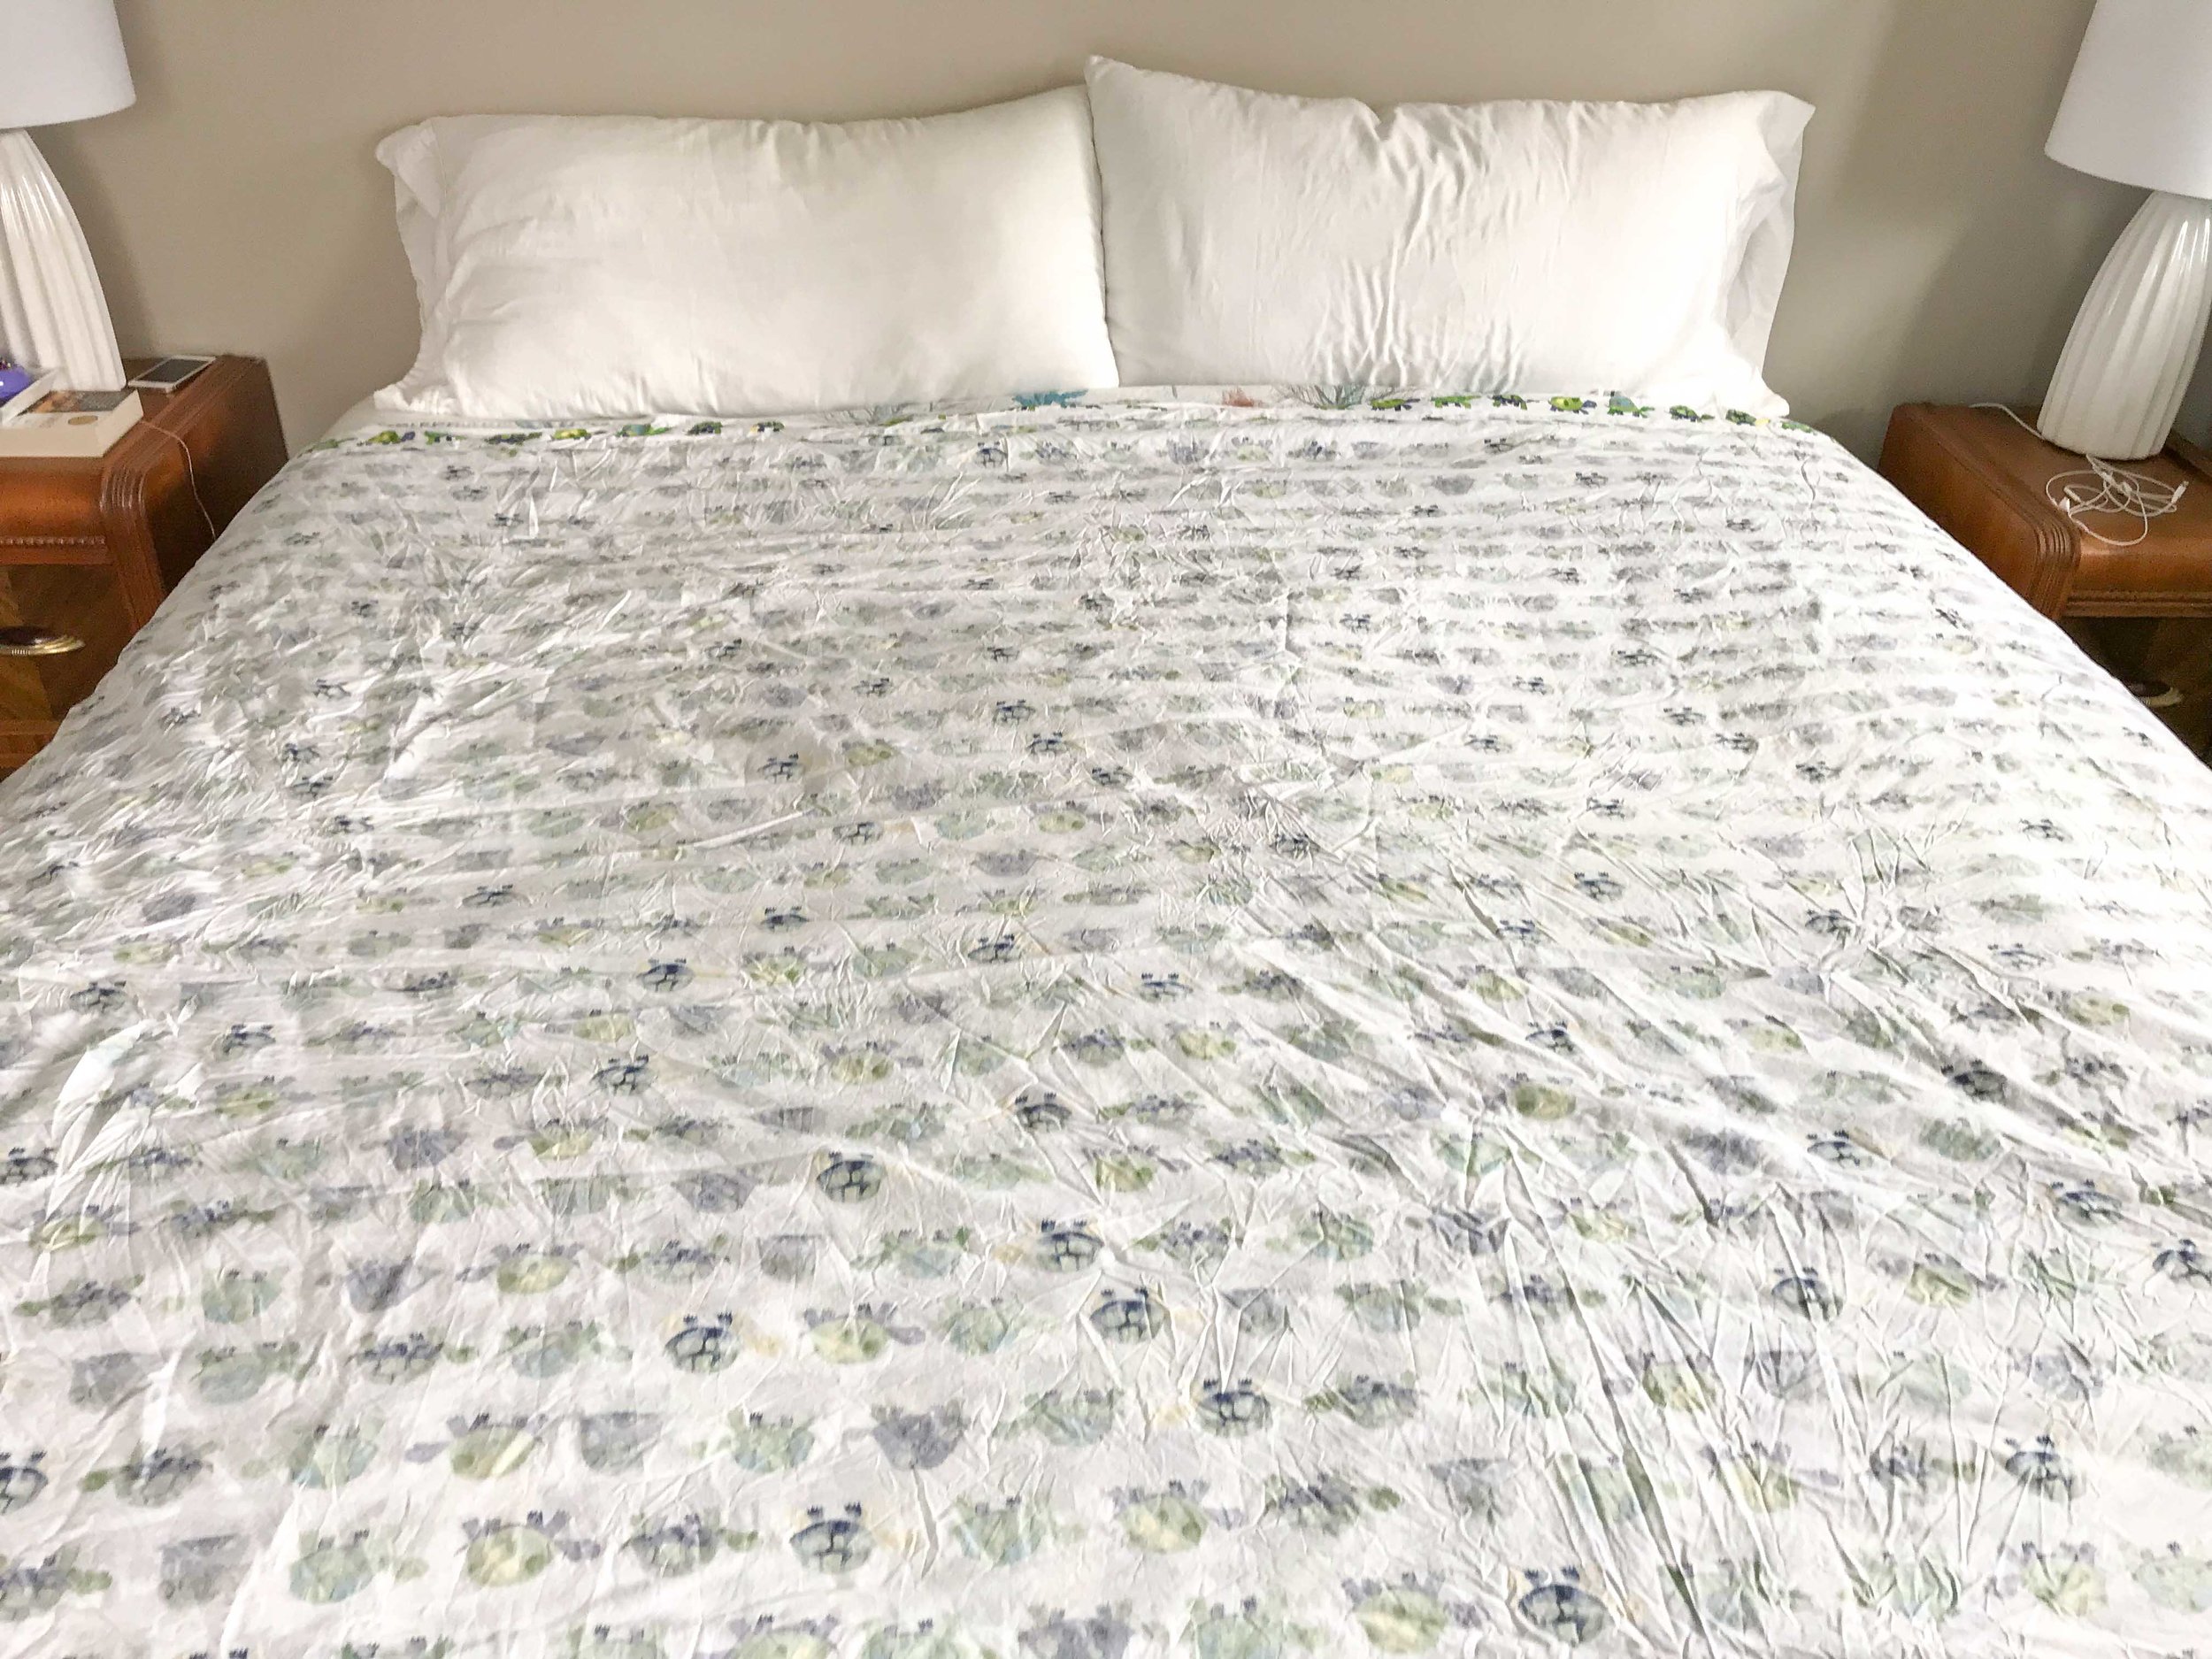 Make A Duvet Cover From Sheets Mid, How To Make A Duvet Cover With Two Sheets